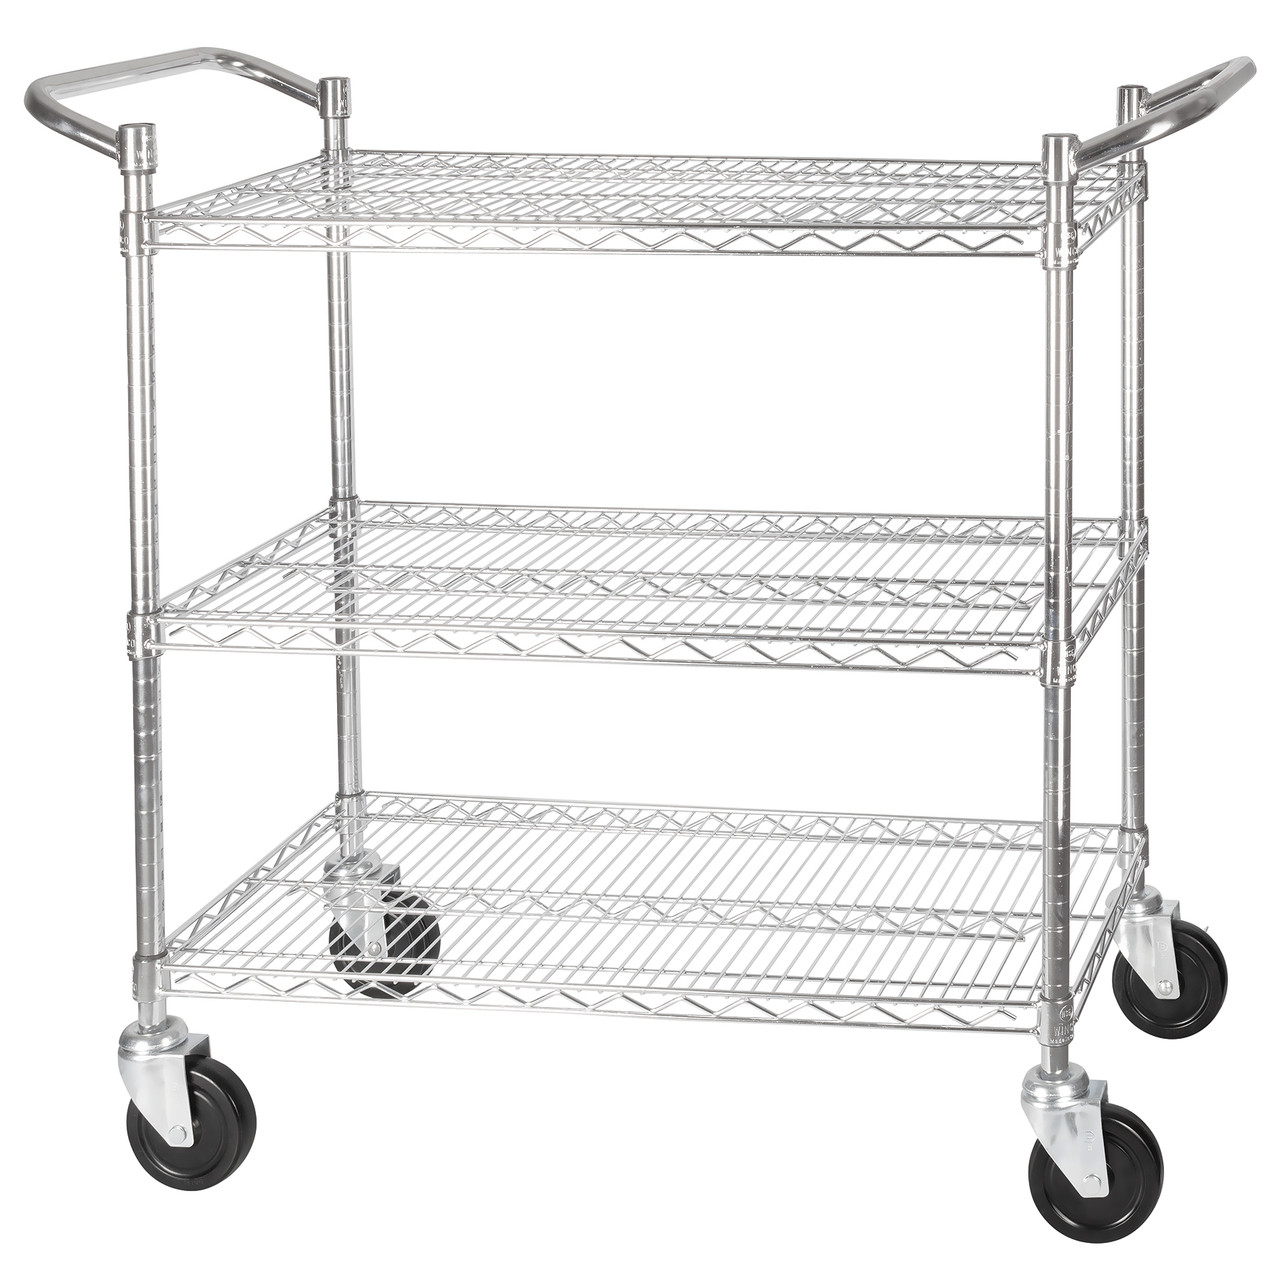 Winco 3-Tier Wire Shelving Cart, Chrome Plated, 18"x 36", Double H